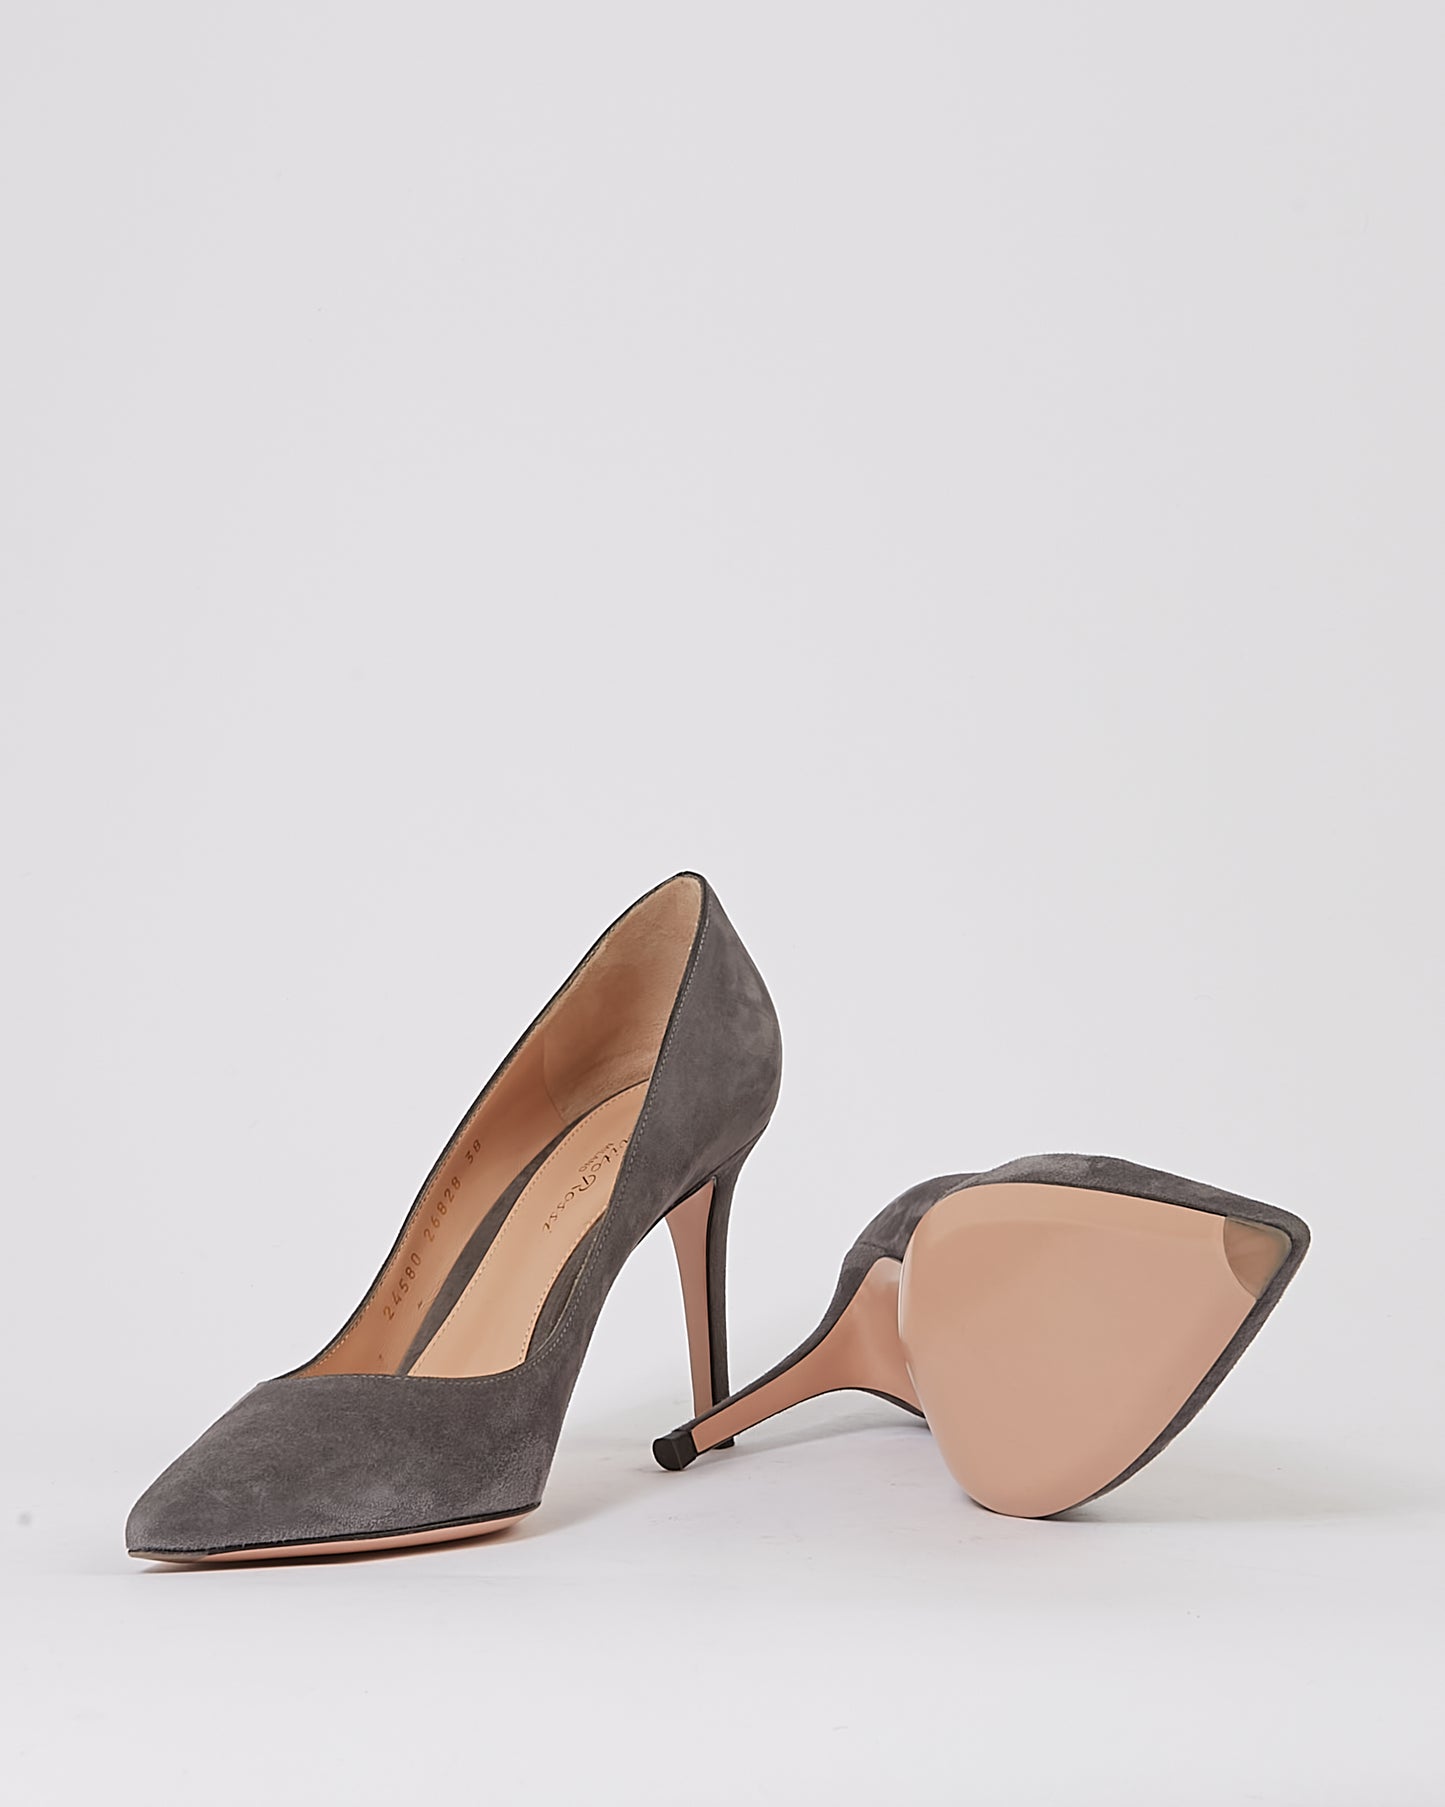 Gianvitto Rossi Grey Suede Point Toe Pumps - 38